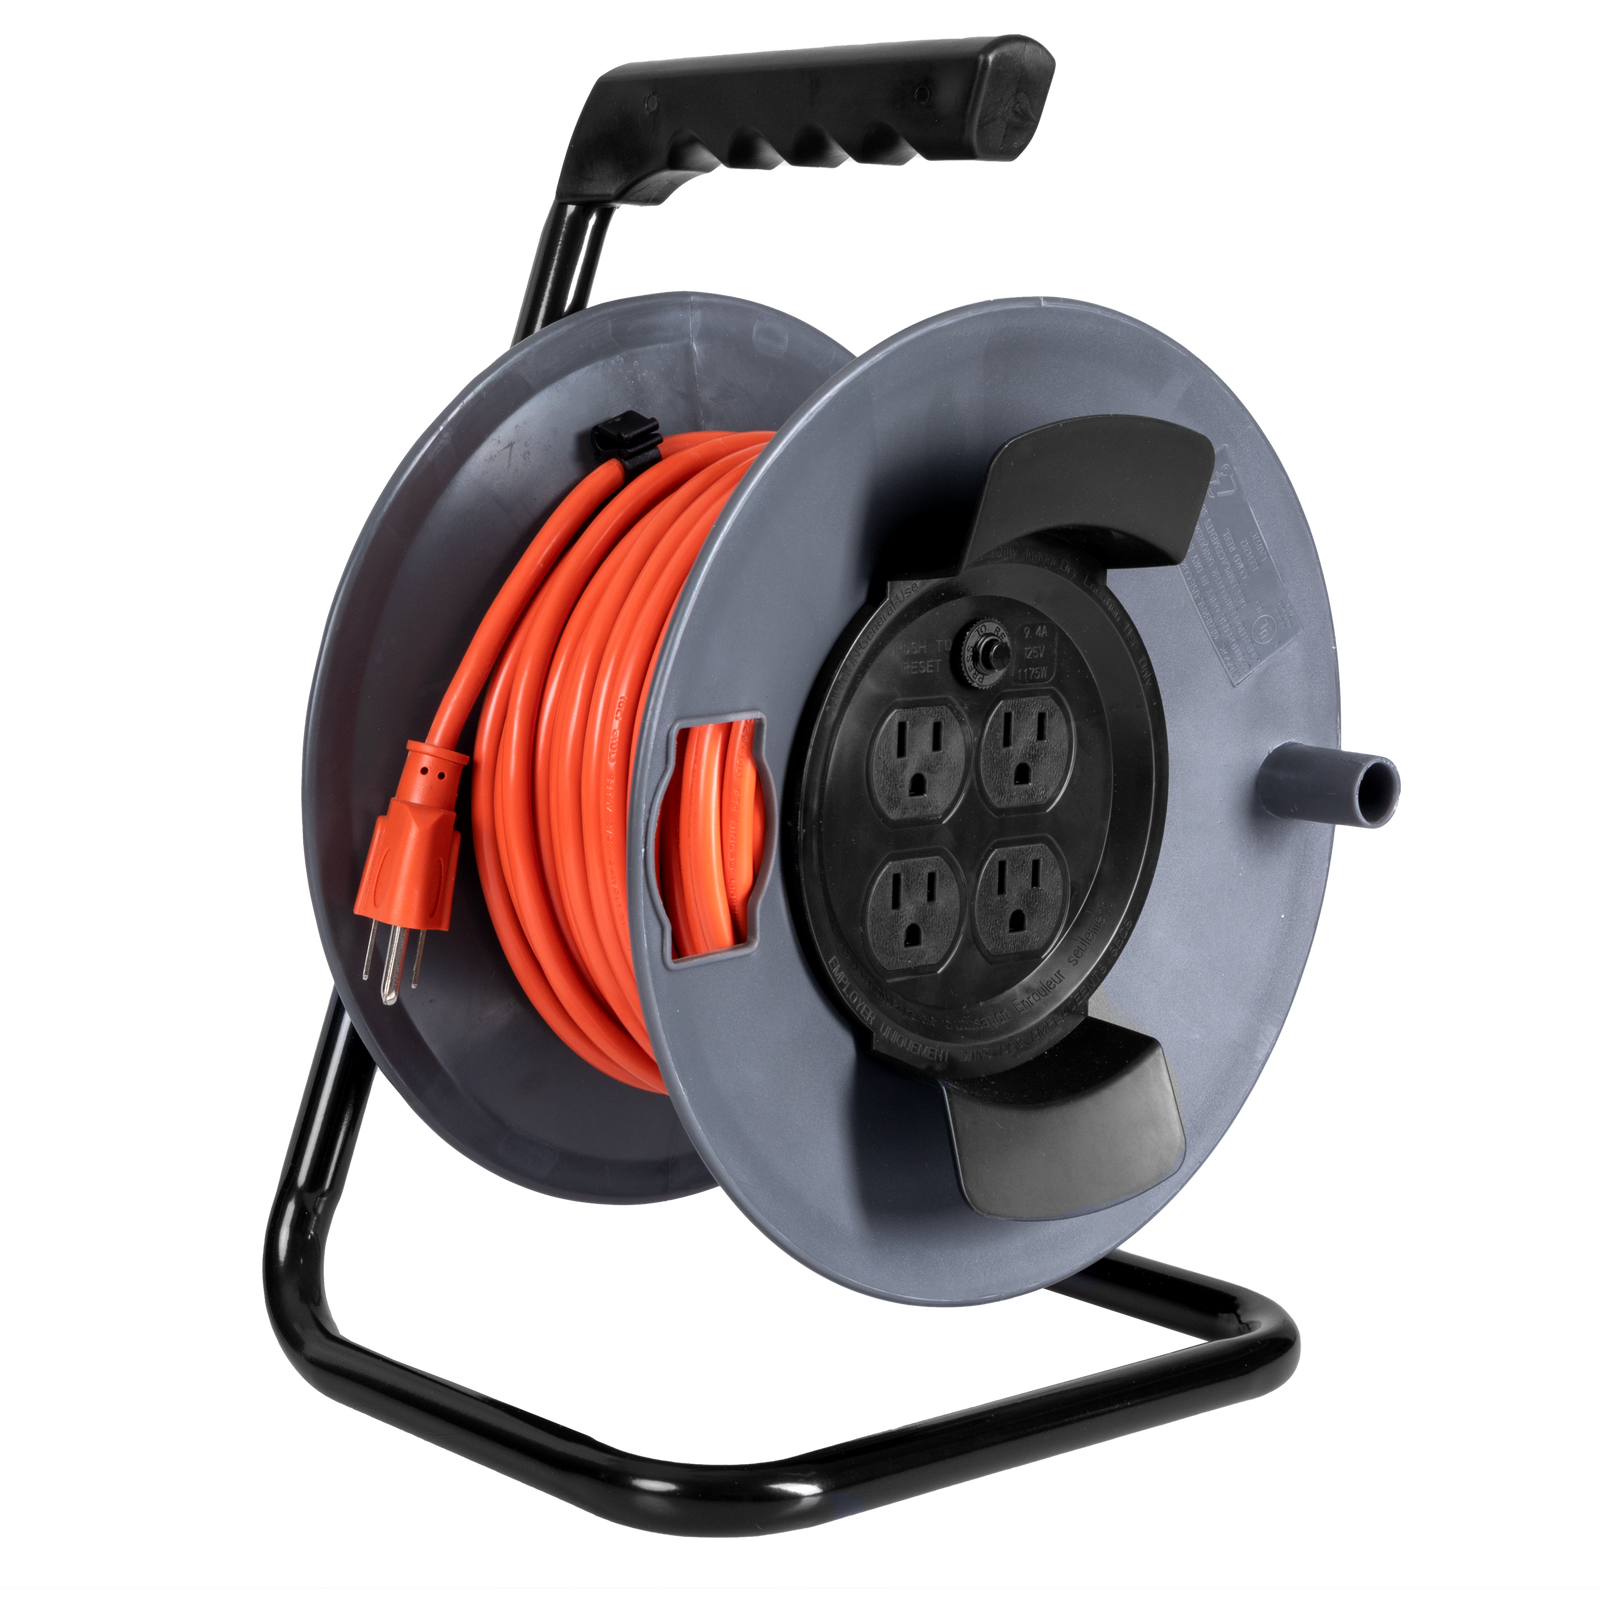  IRON FORGE CABLE 25 ft Retractable Extension Cord Reel with  Power Foot Switch - Cord Reel with Multiple Outlet, Outdoor Electrical  Roller Reel - 16/3 SJTW Durable Winding Cable, 13 Amp